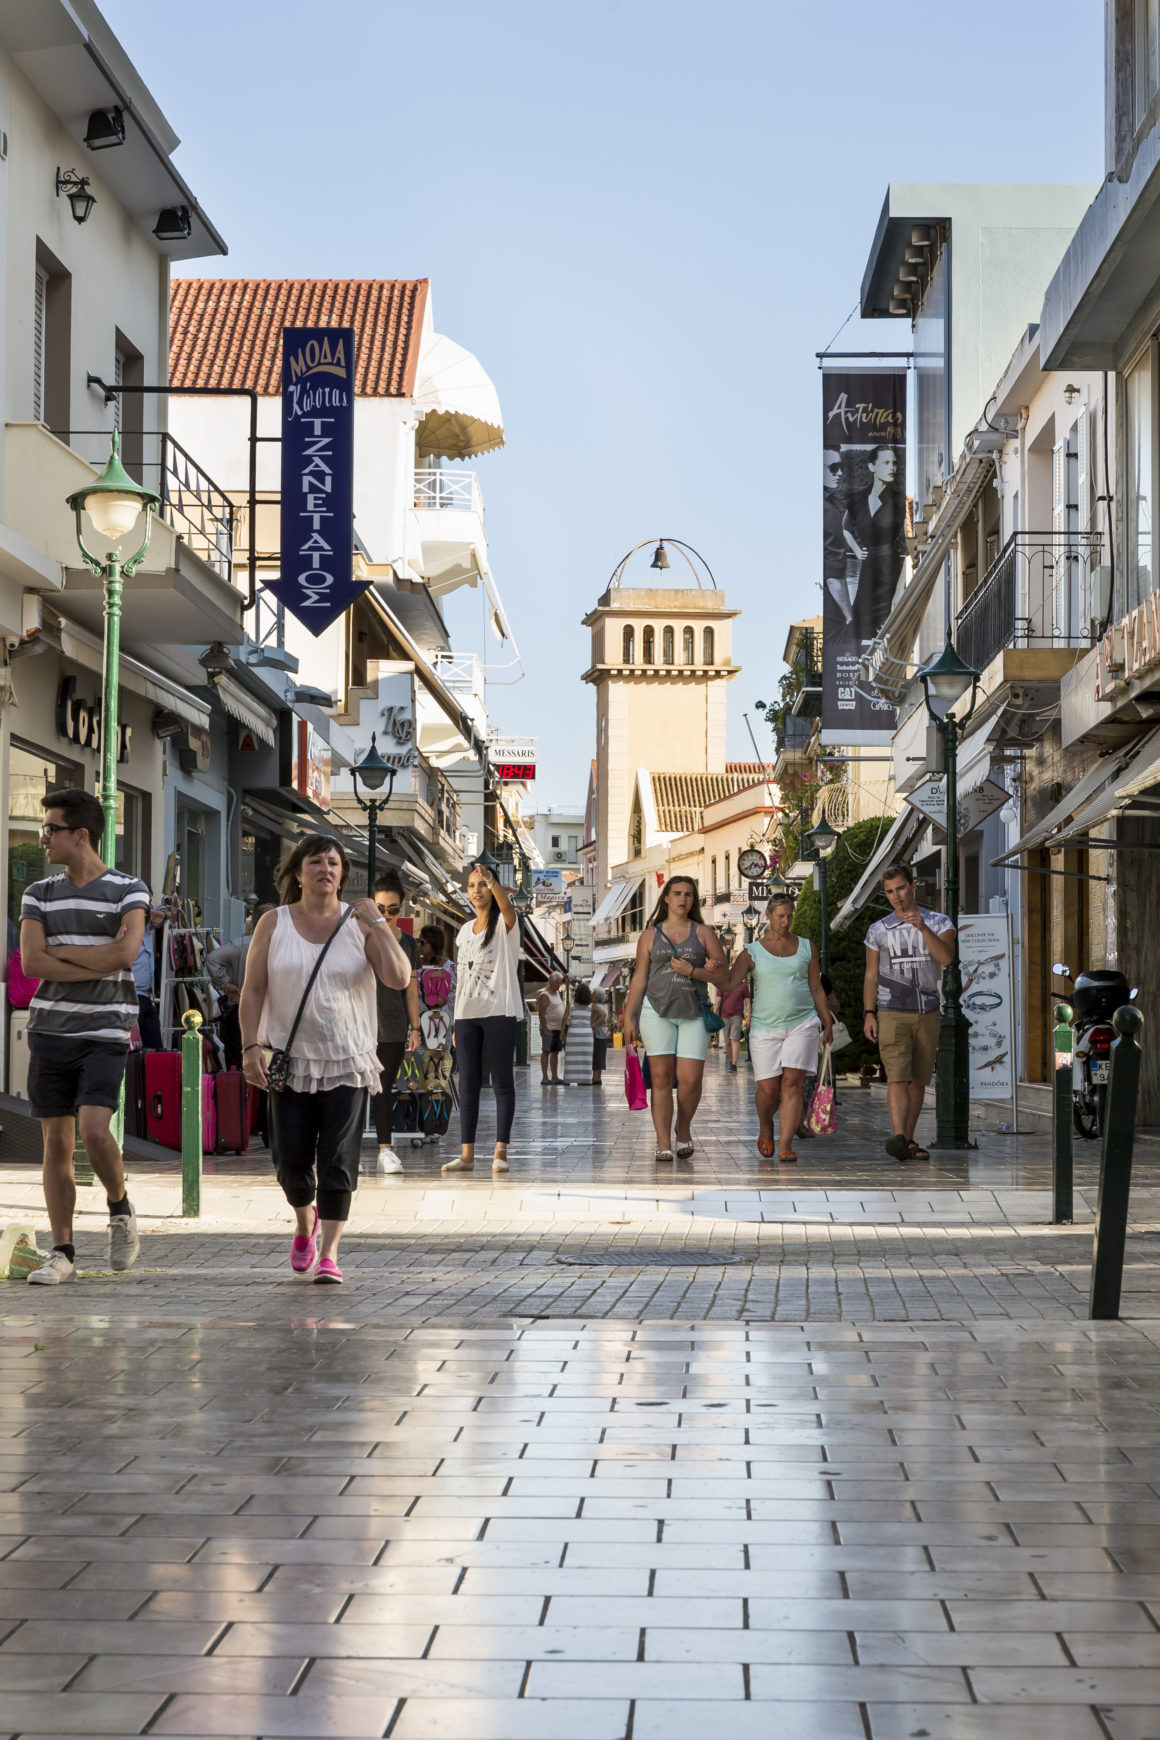 Lithostroto (Cobbled Street) is the main comercial point of Argostoli in the island of Kefalonia.